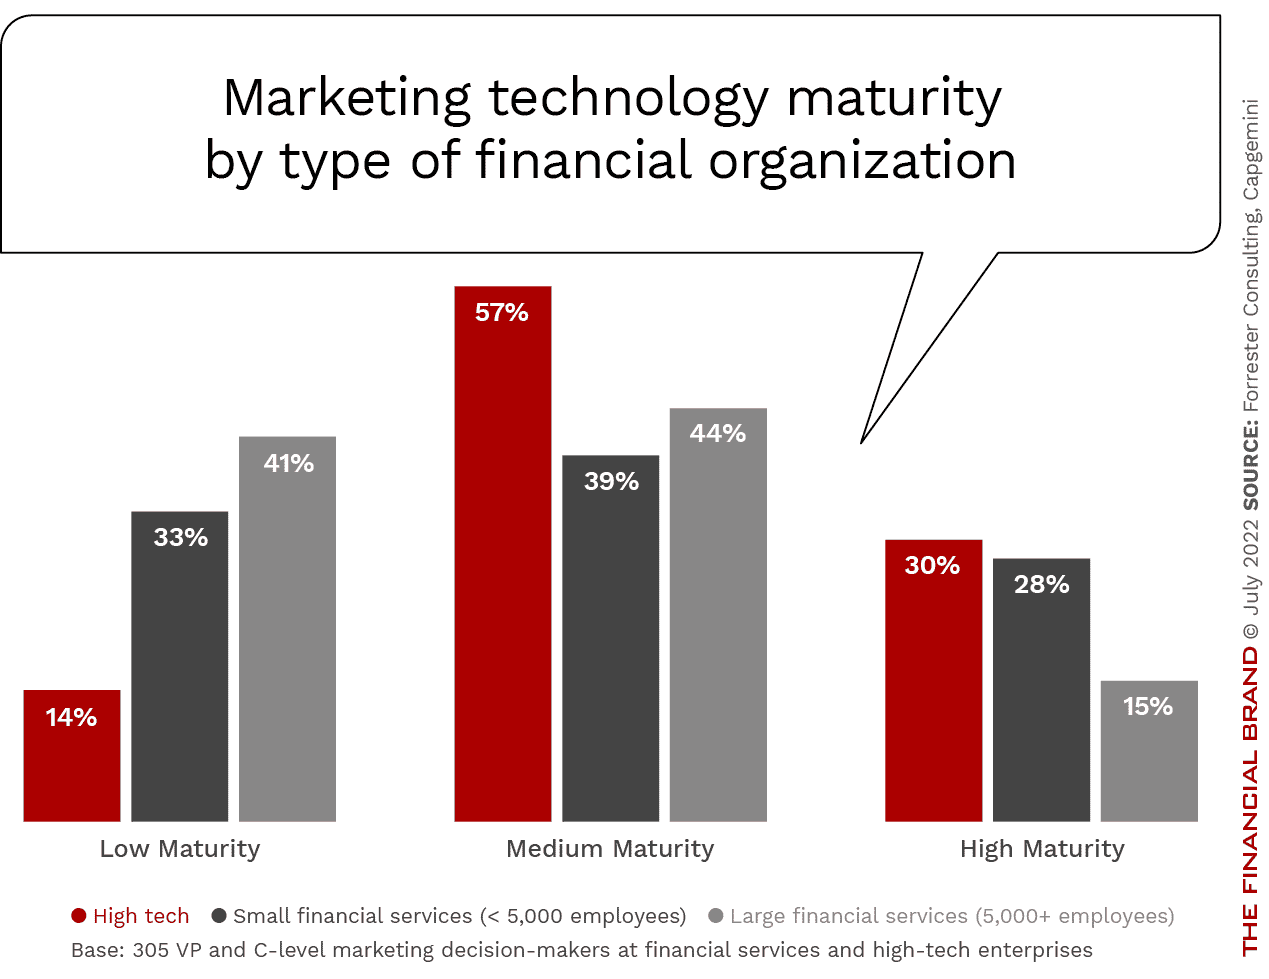 Banking Must Upgrade Marketing Technology to Become Future-Ready